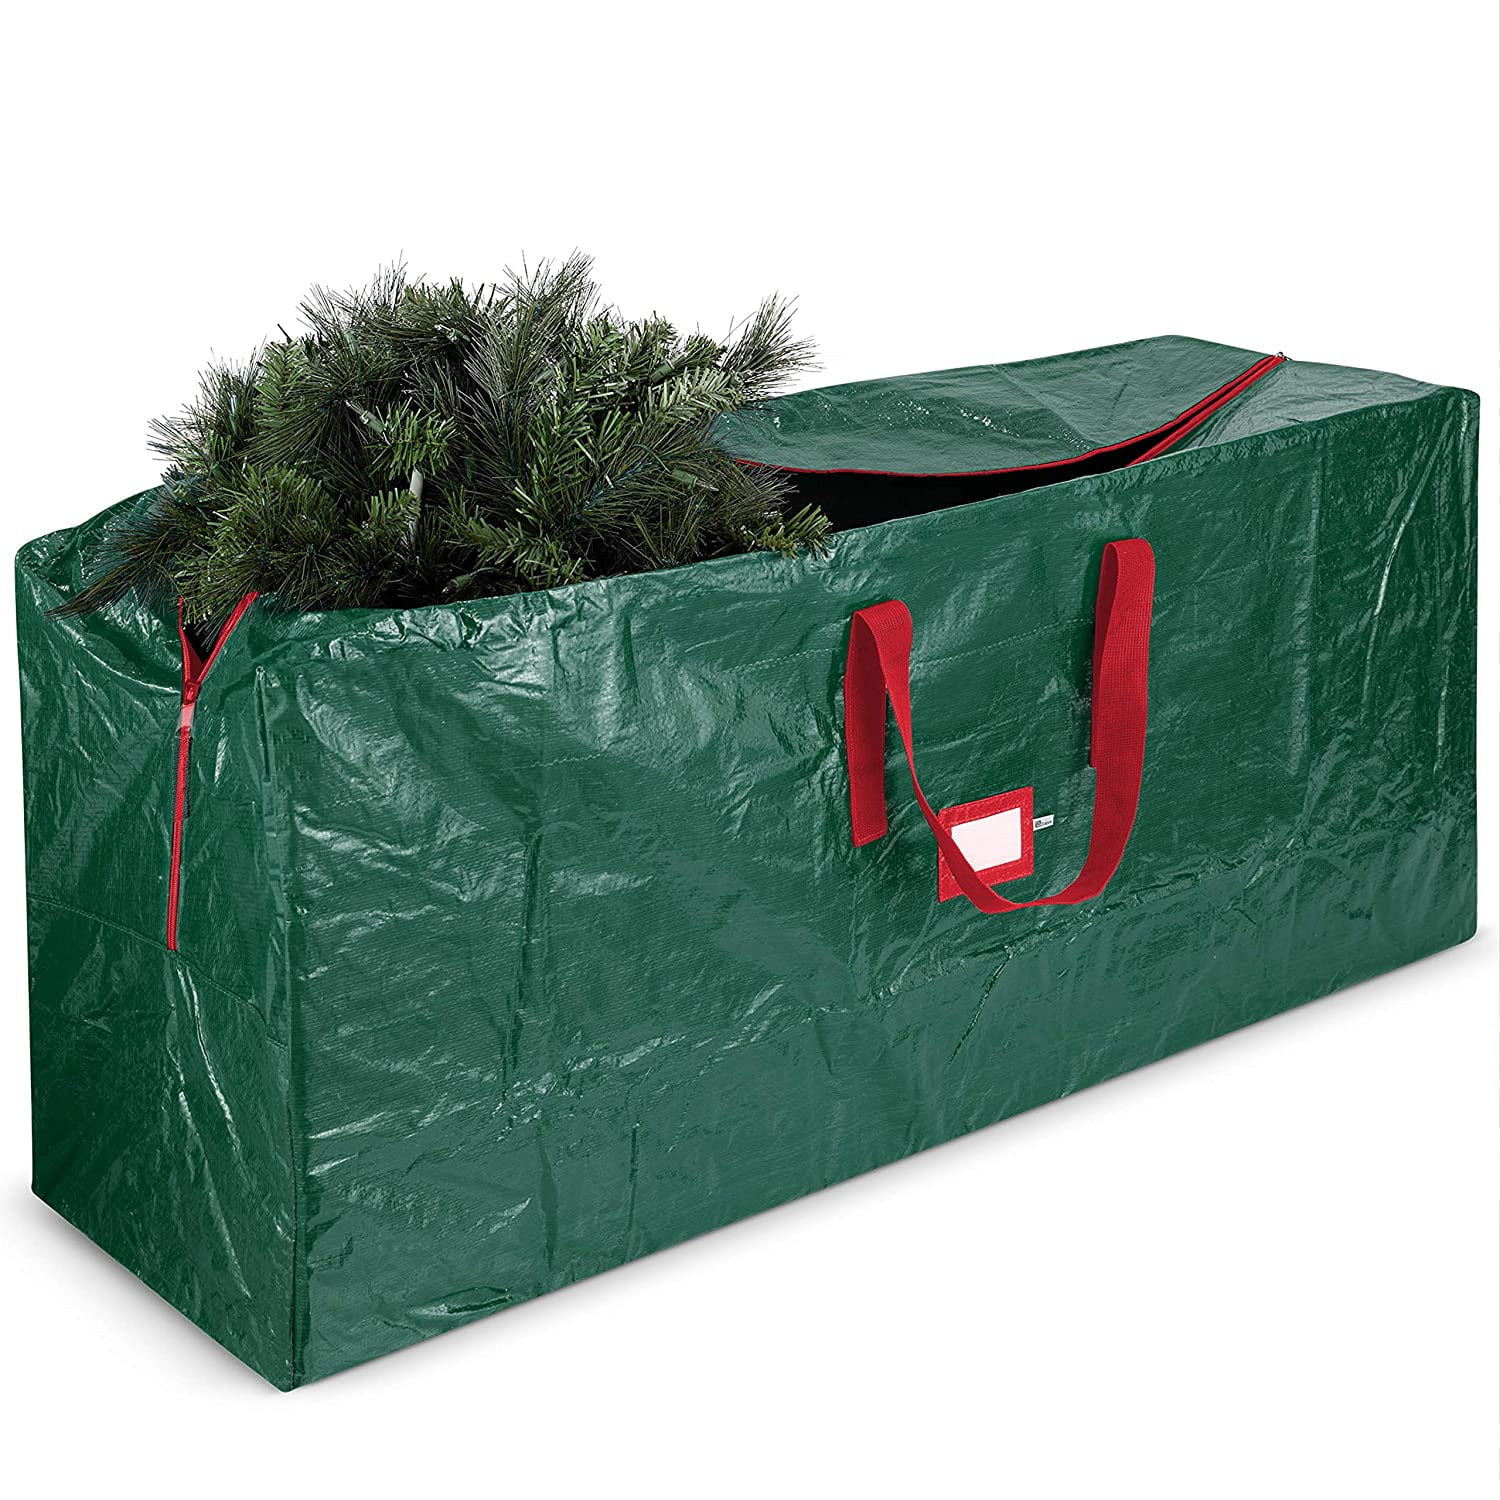 White Heavy Duty Large Artificial Christmas Tree Storage Bag Clean Up Holiday 